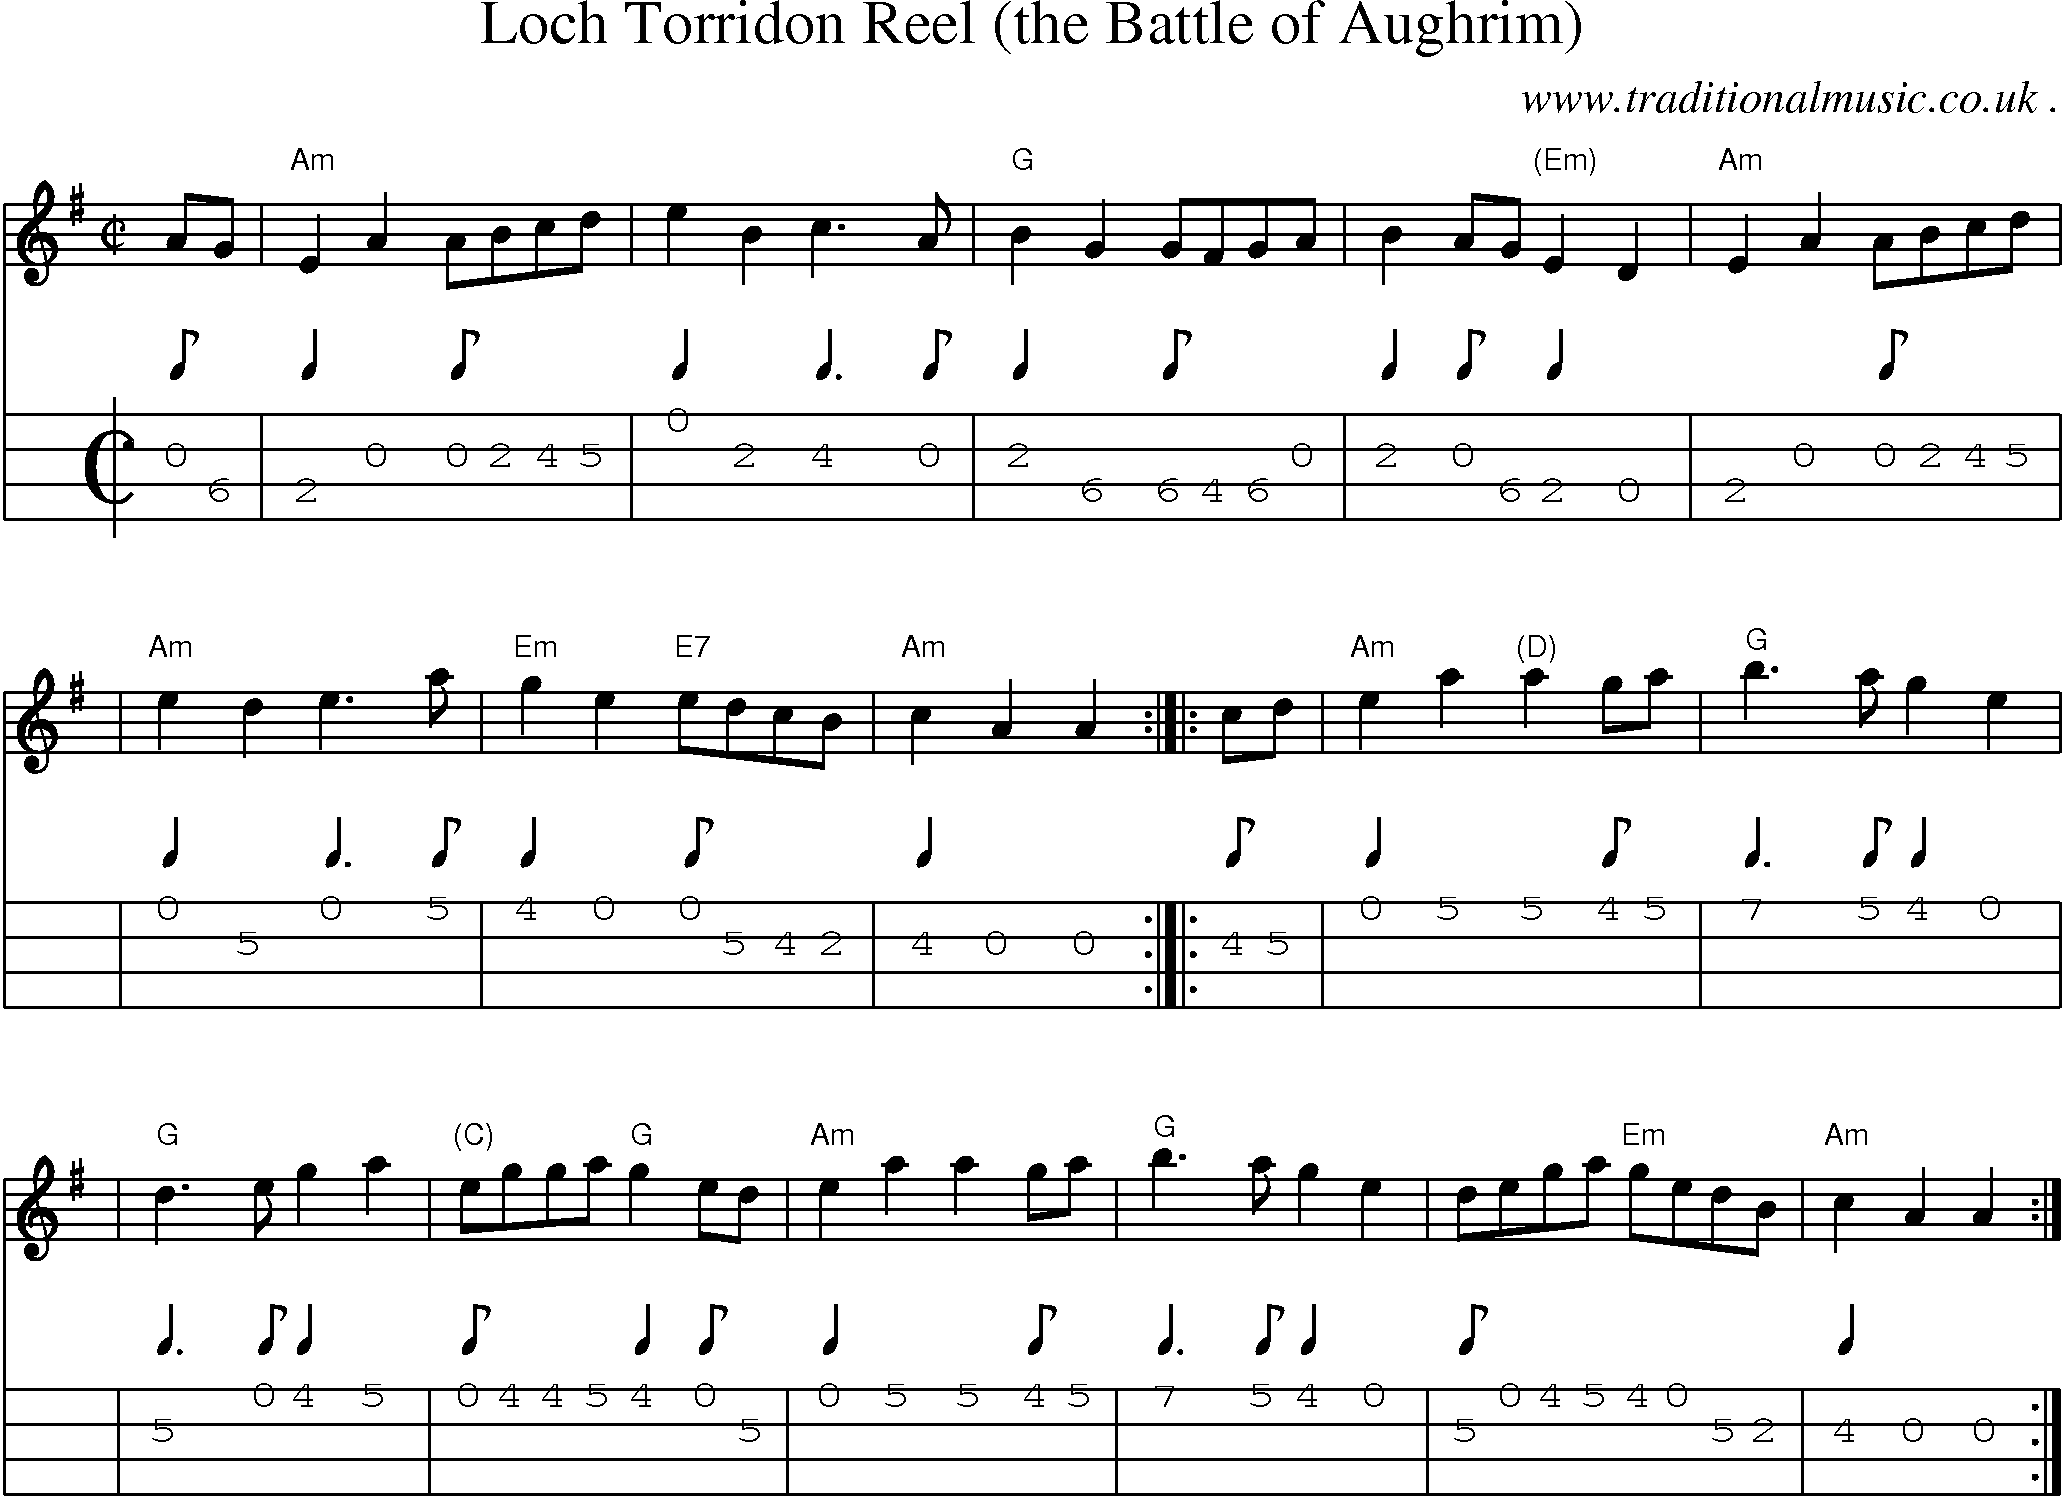 Sheet-music  score, Chords and Mandolin Tabs for Loch Torridon Reel The Battle Of Aughrim